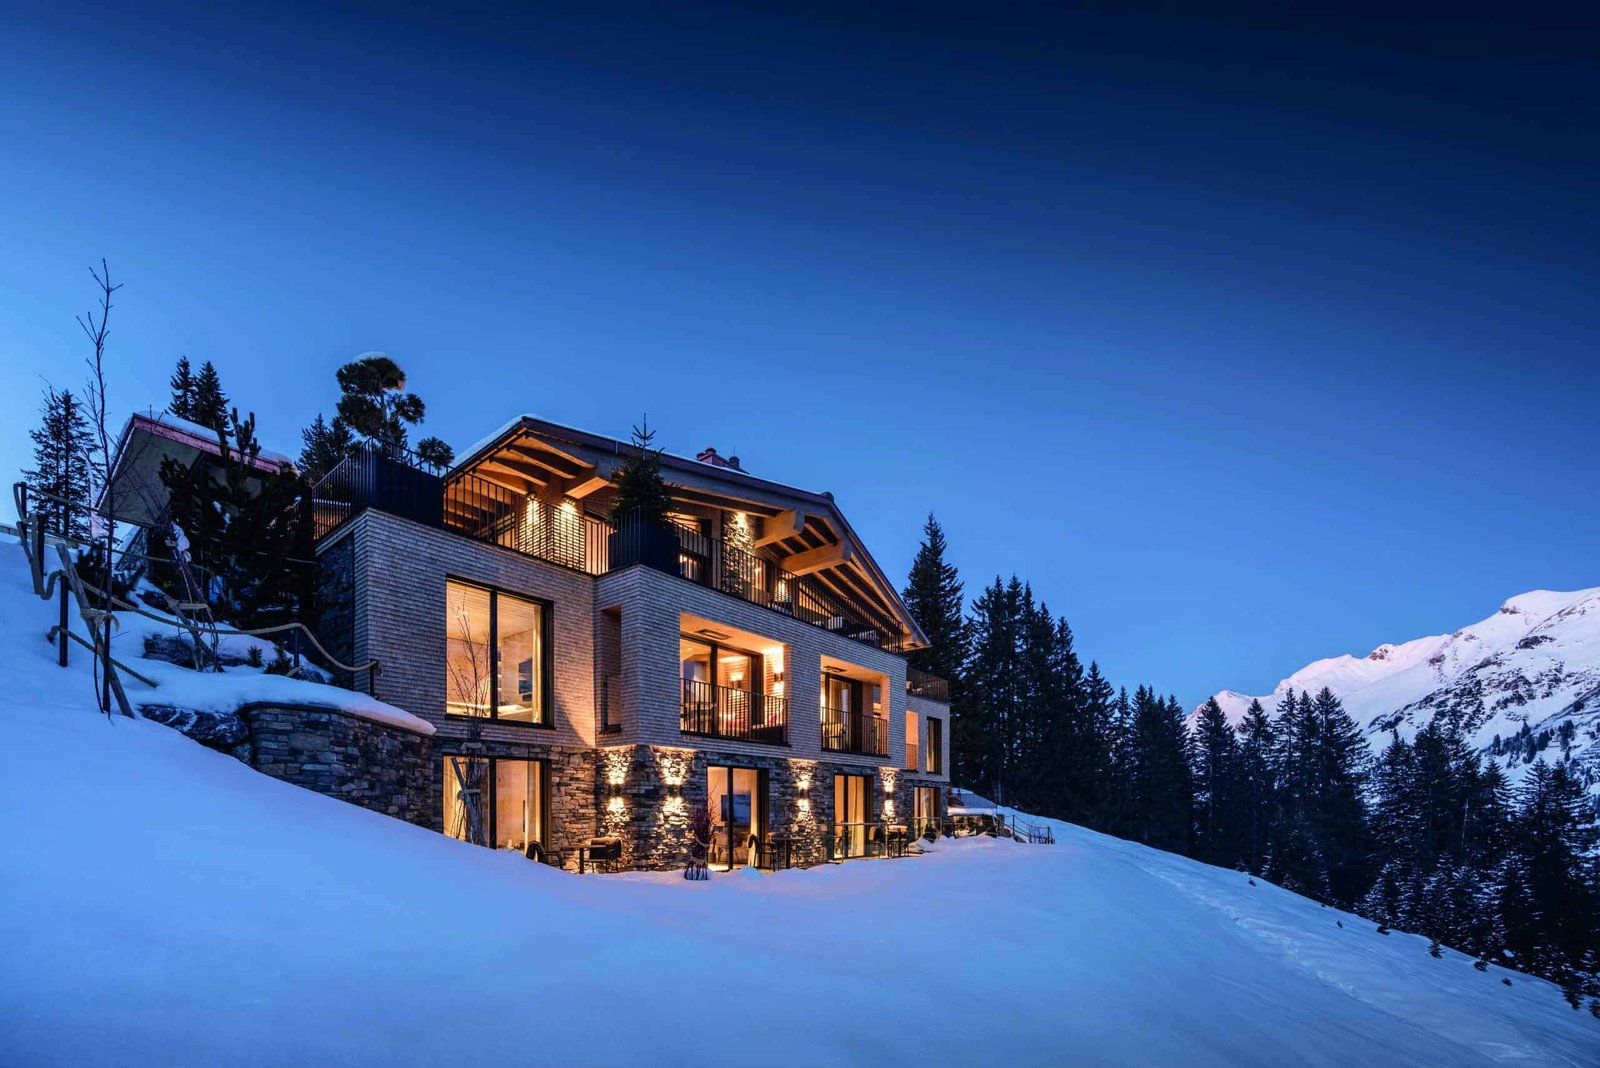 An experiential house nestled among the snowy mountain.